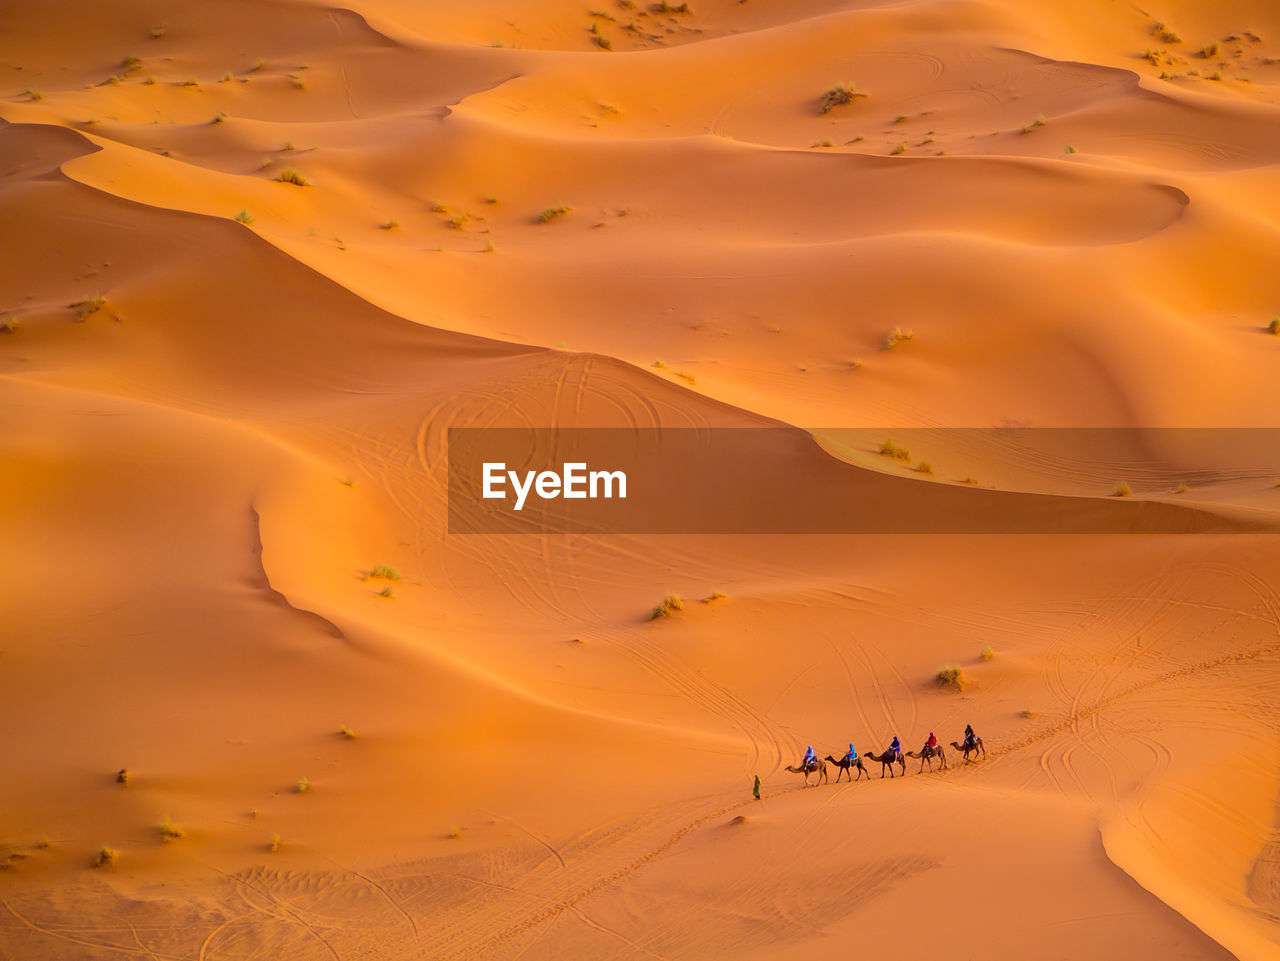 People riding camels on sand dunes in desert